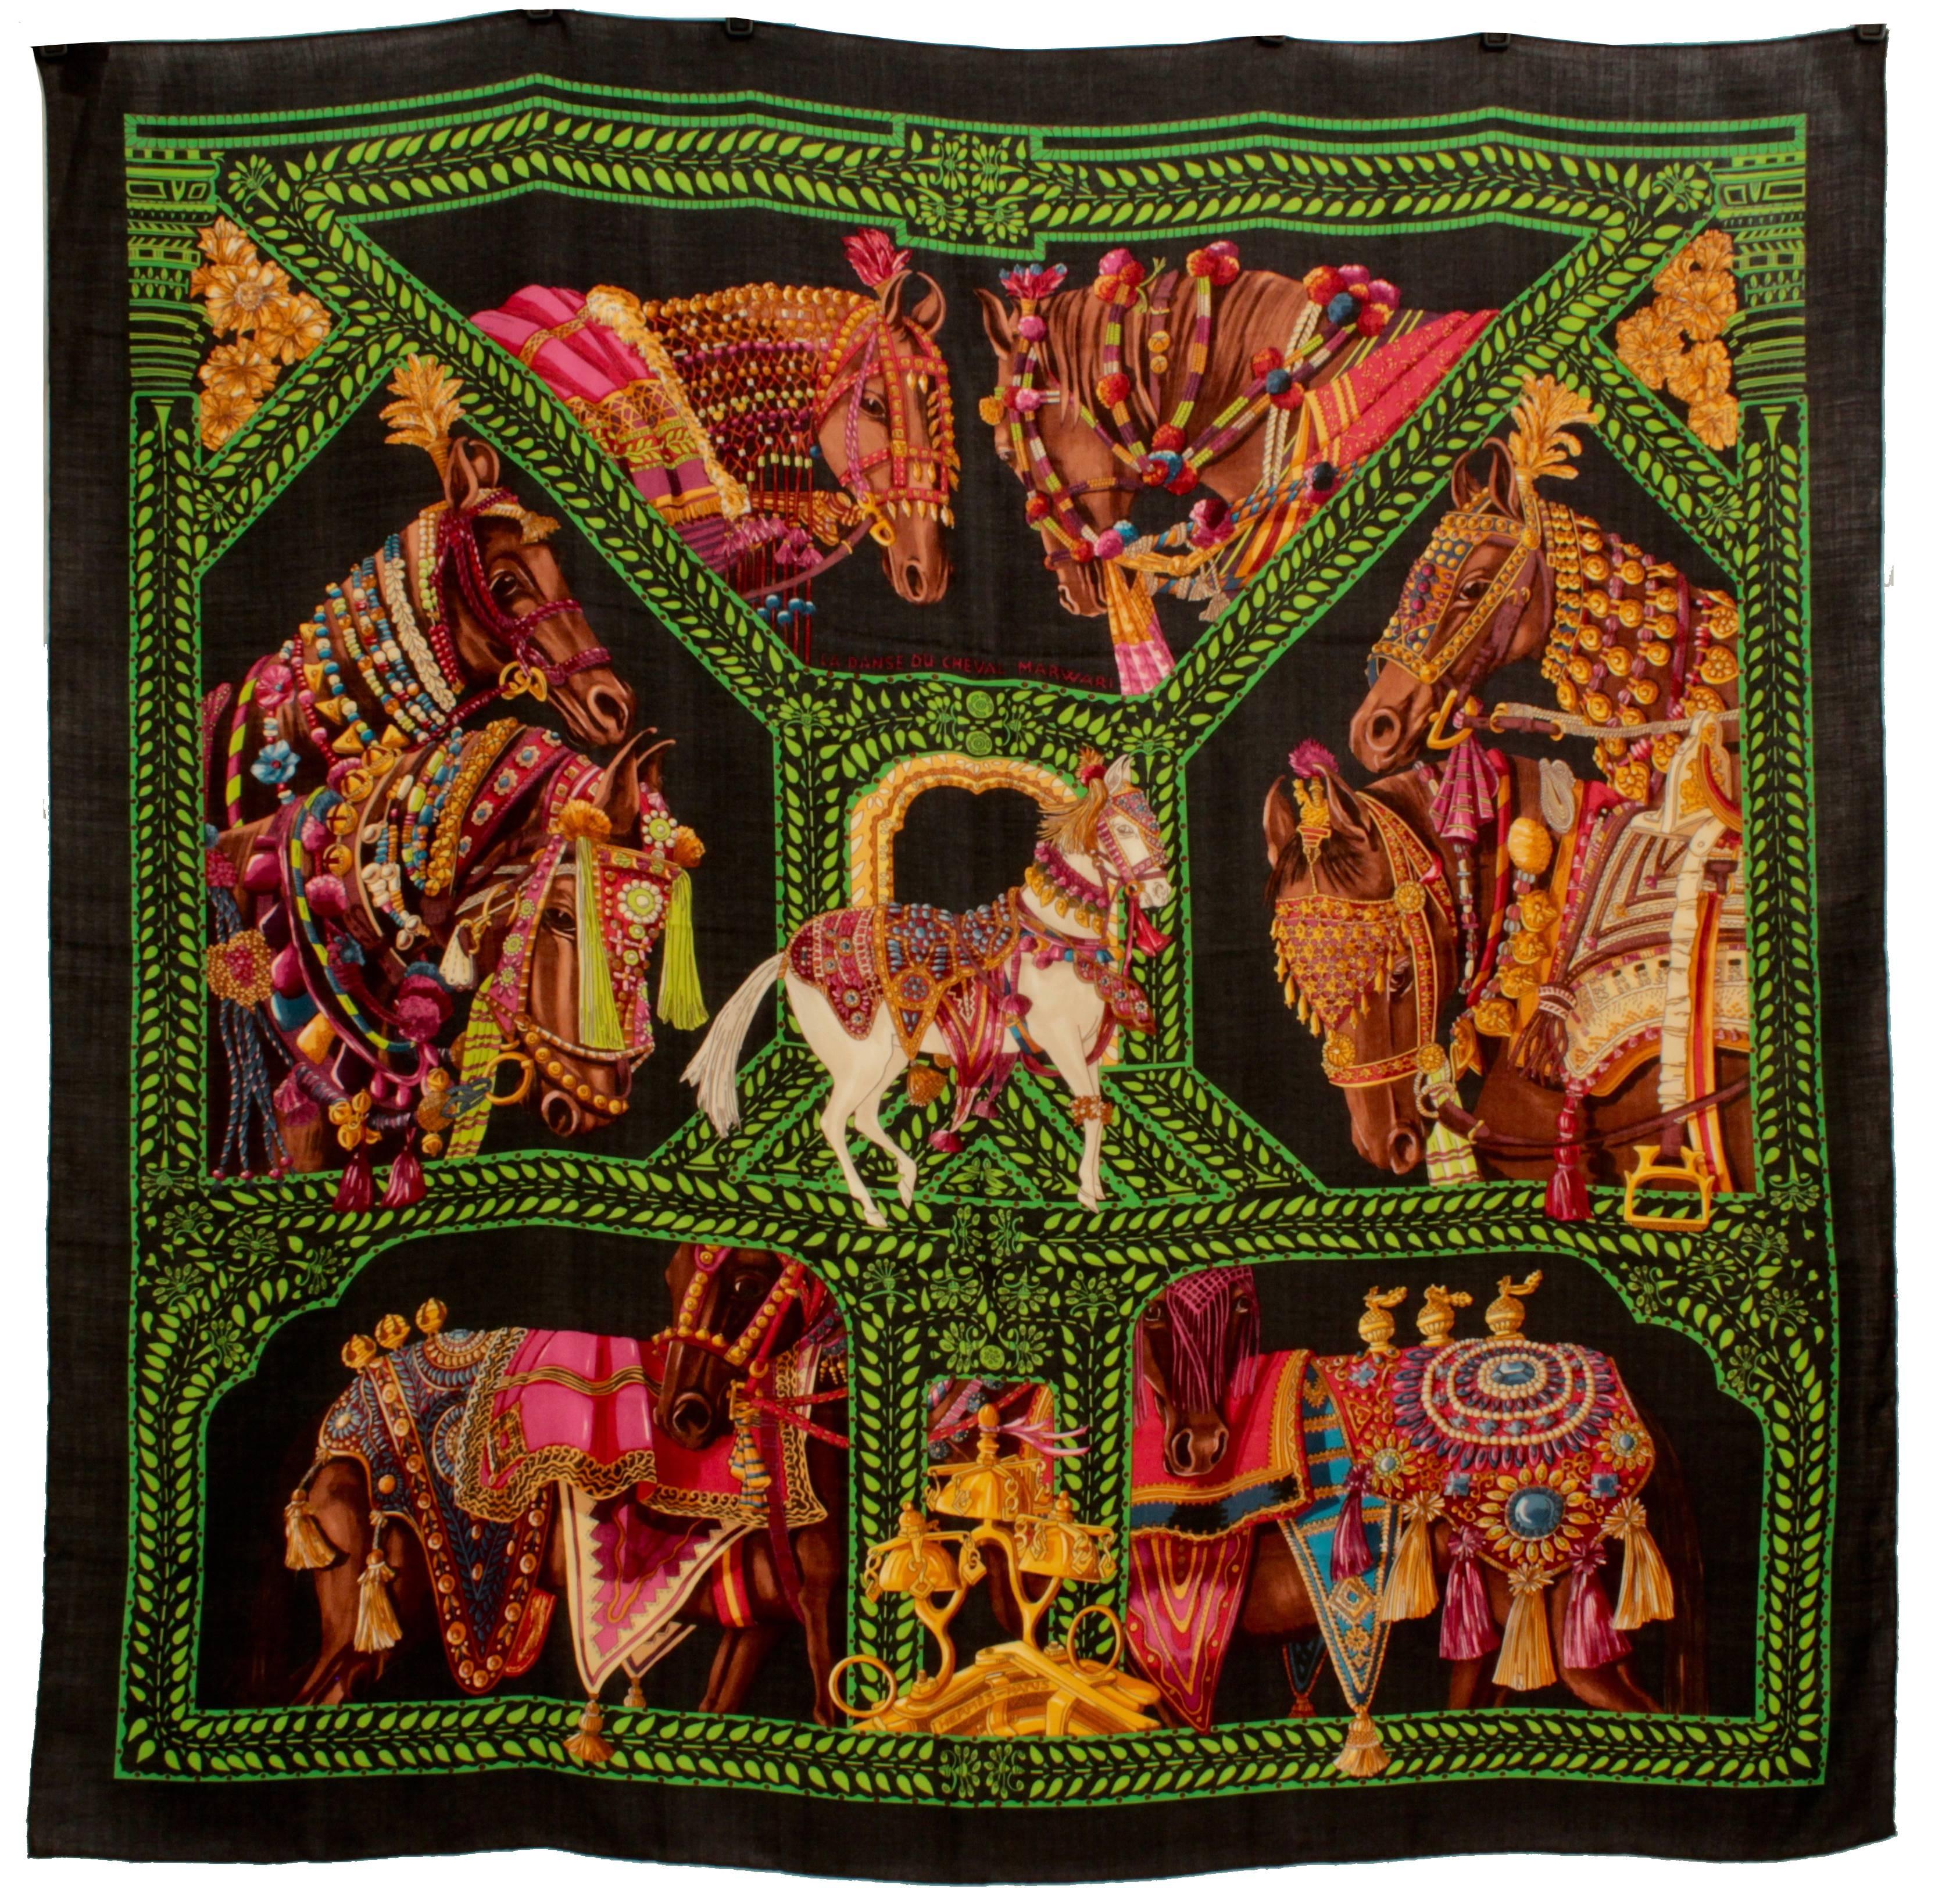 This is one of our favorite Hermes La Maison Des Carres prints from designer Annie Faivre - and in our favorite colorway of jewel tones against a black background.  La Danse du Cheval Marwari was released as a 140cm (55 inch) cashmere and silk shawl